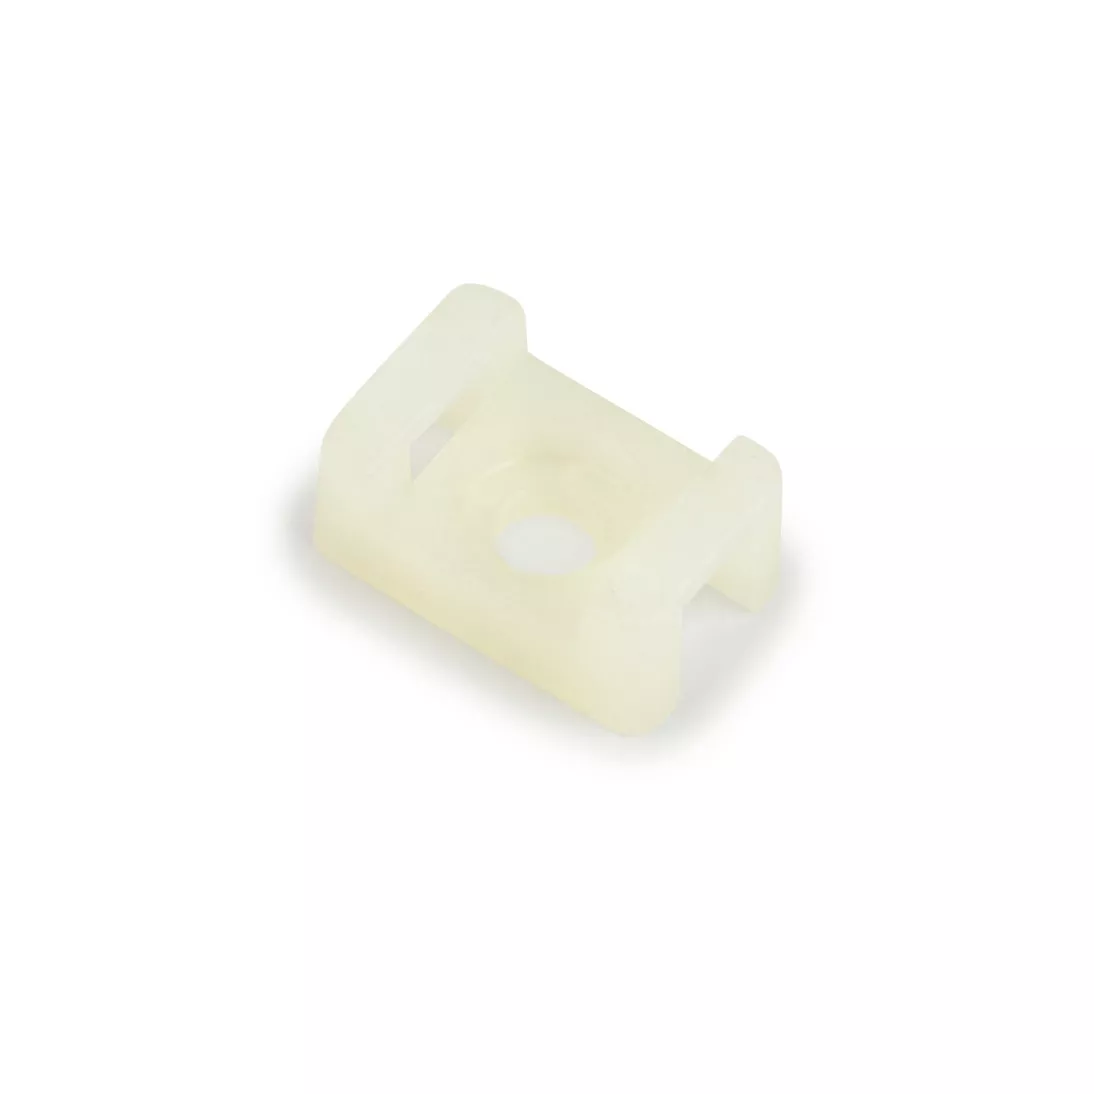 3M™ Cable Tie Base 06299, Screw Mount, Natural/Nylon, 0.87 in x 0.62 in,
100 per bag, 500/Case